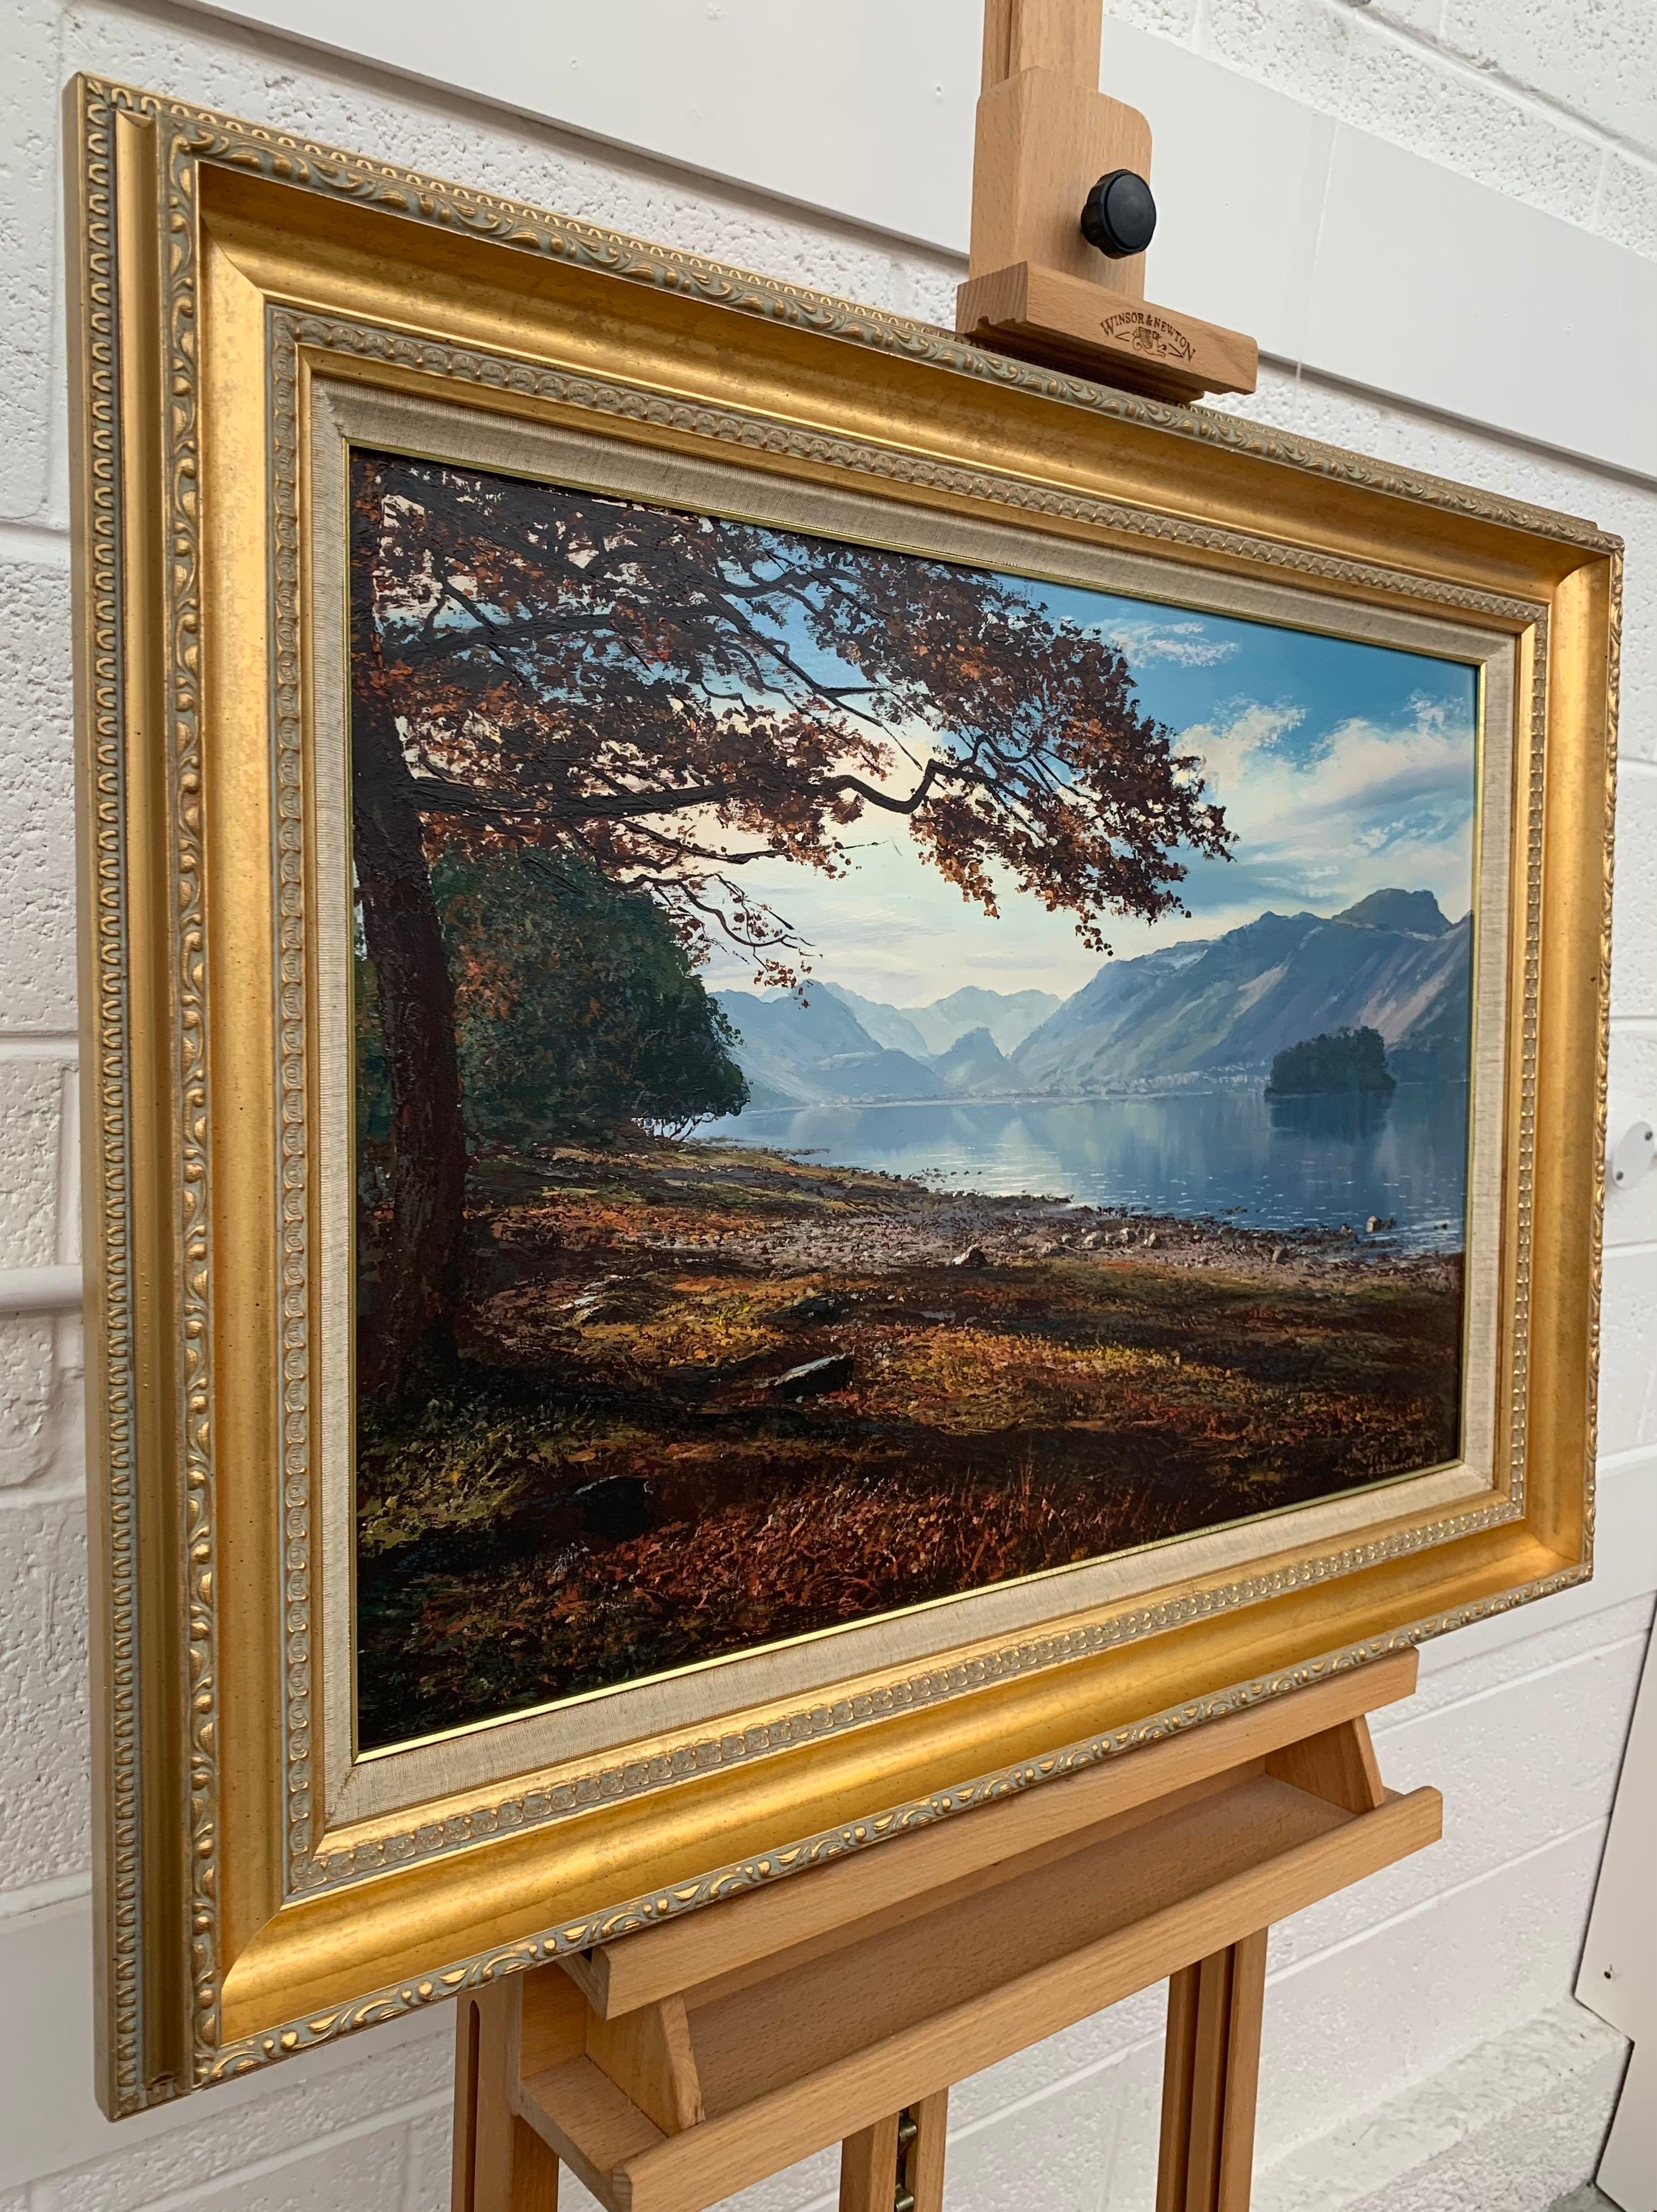 Borrowdale & Scafell in English Lake District by Modern British Landscape Artist - Painting by Arthur Terry Blamires